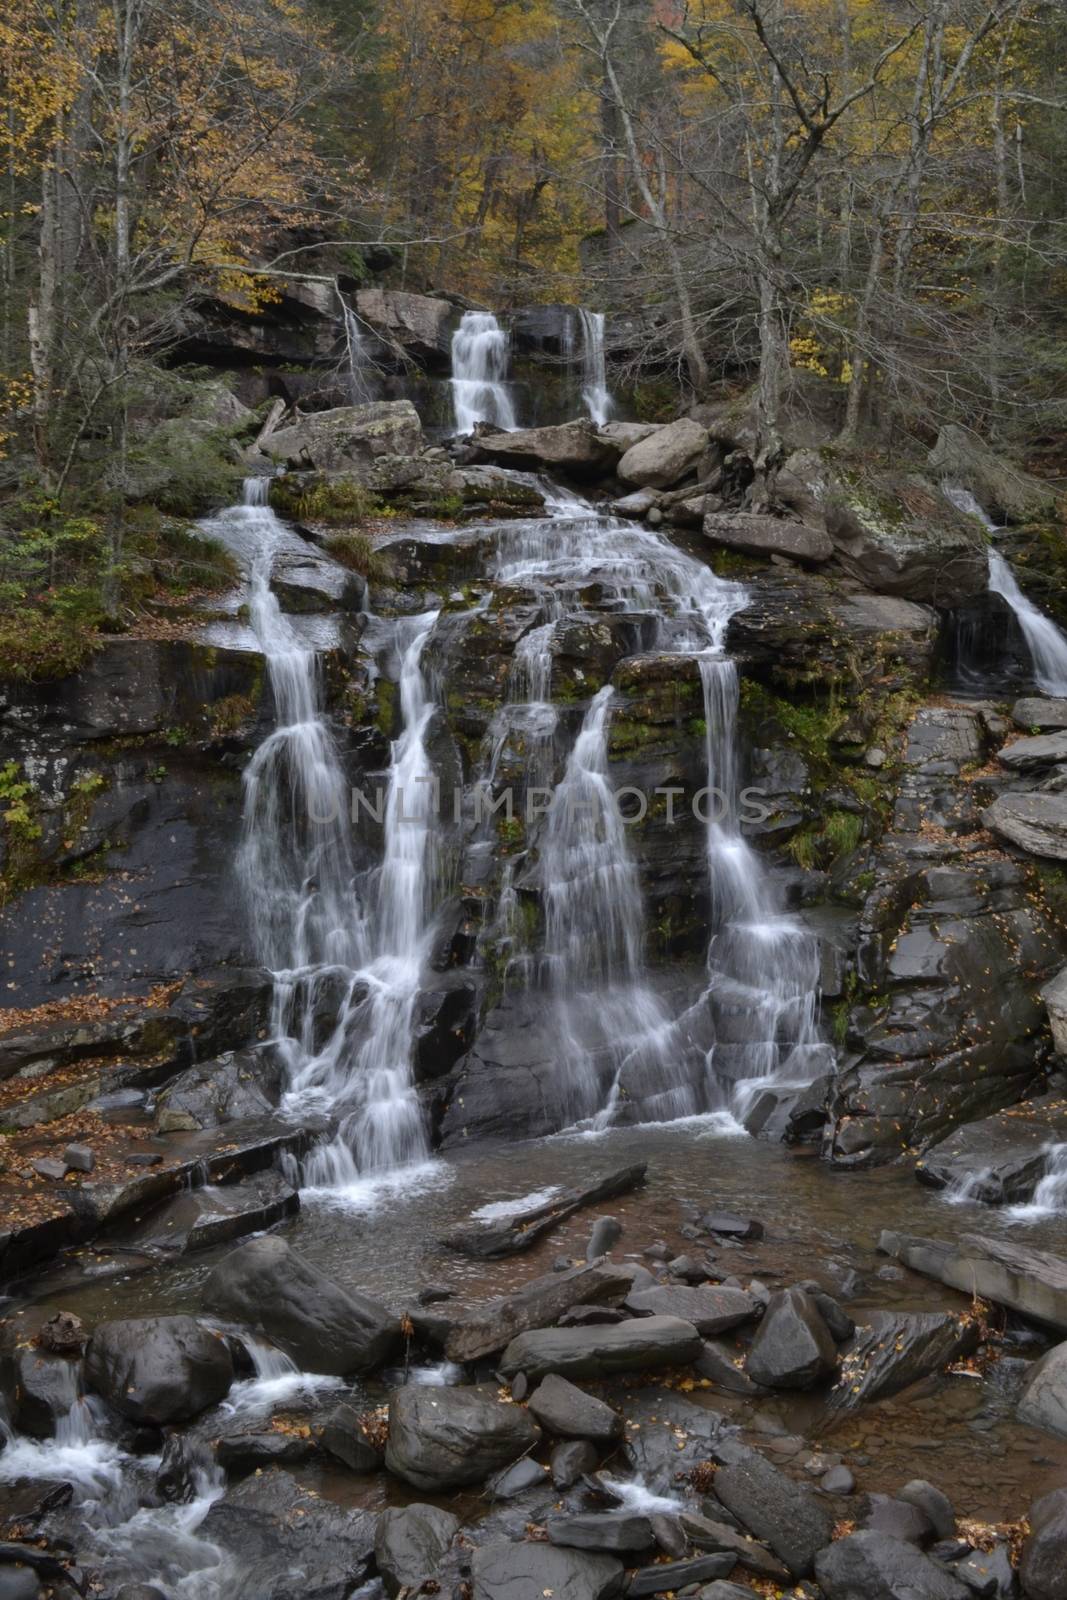 Waterfall in the Catskill mountains by rmbarricarte